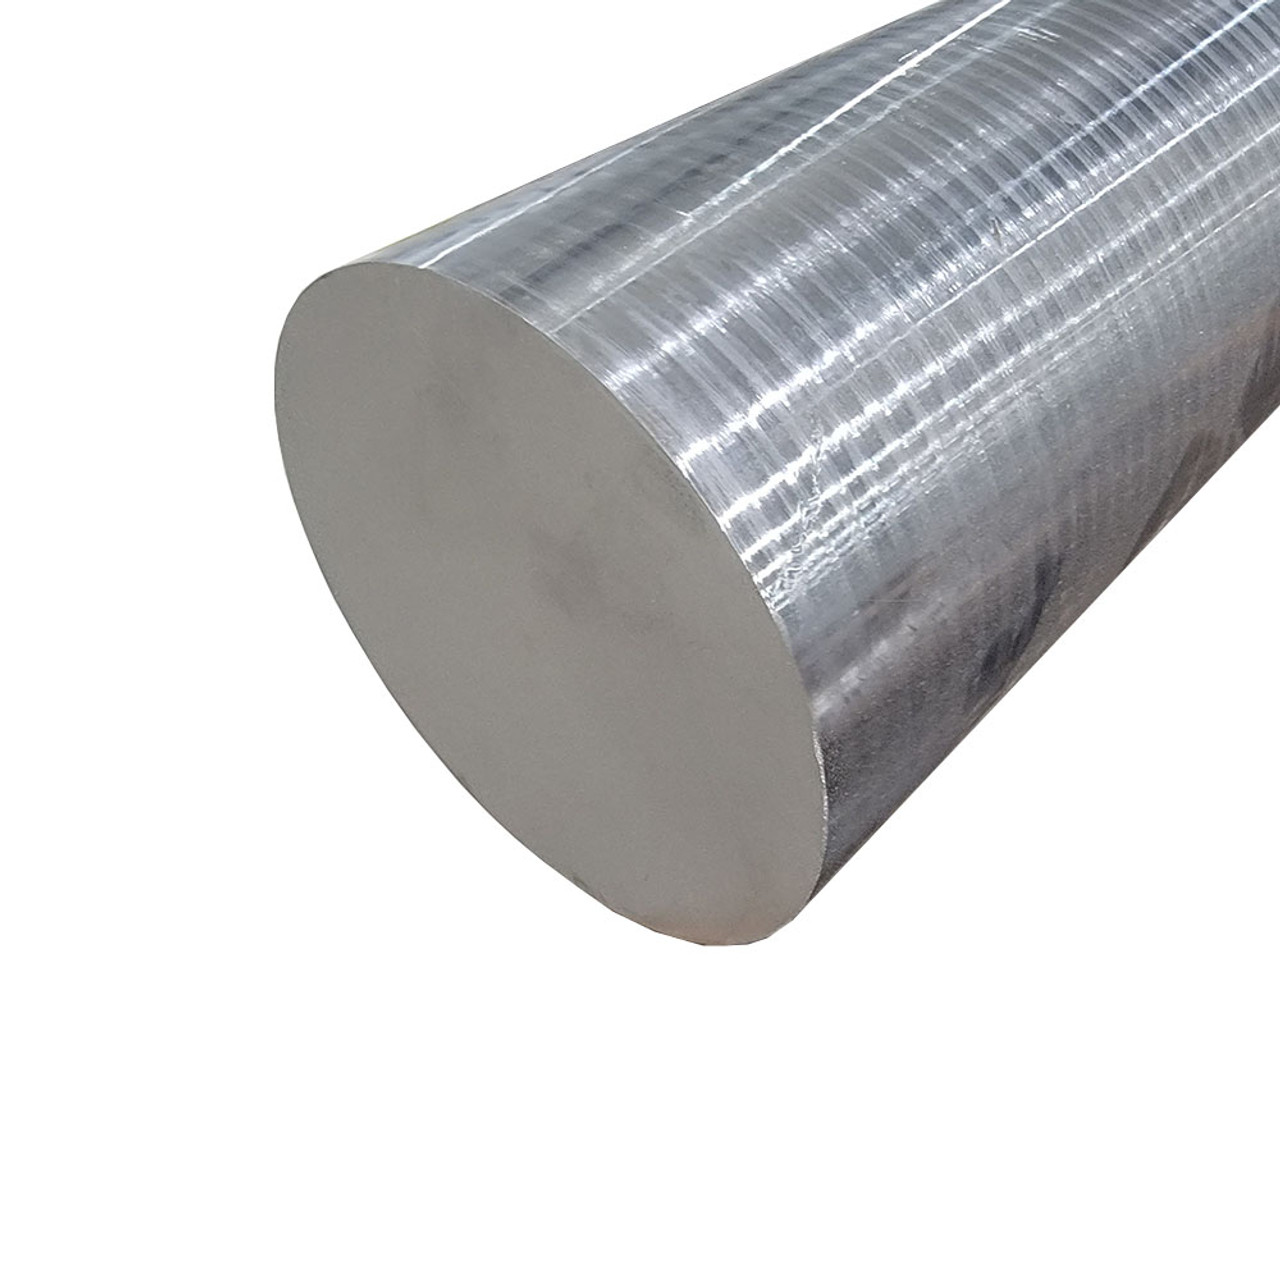 5.500 (5-1/2 inch) x 12 inches, 15-5 Cond A Stainless Steel Round Rod, Rough Turned